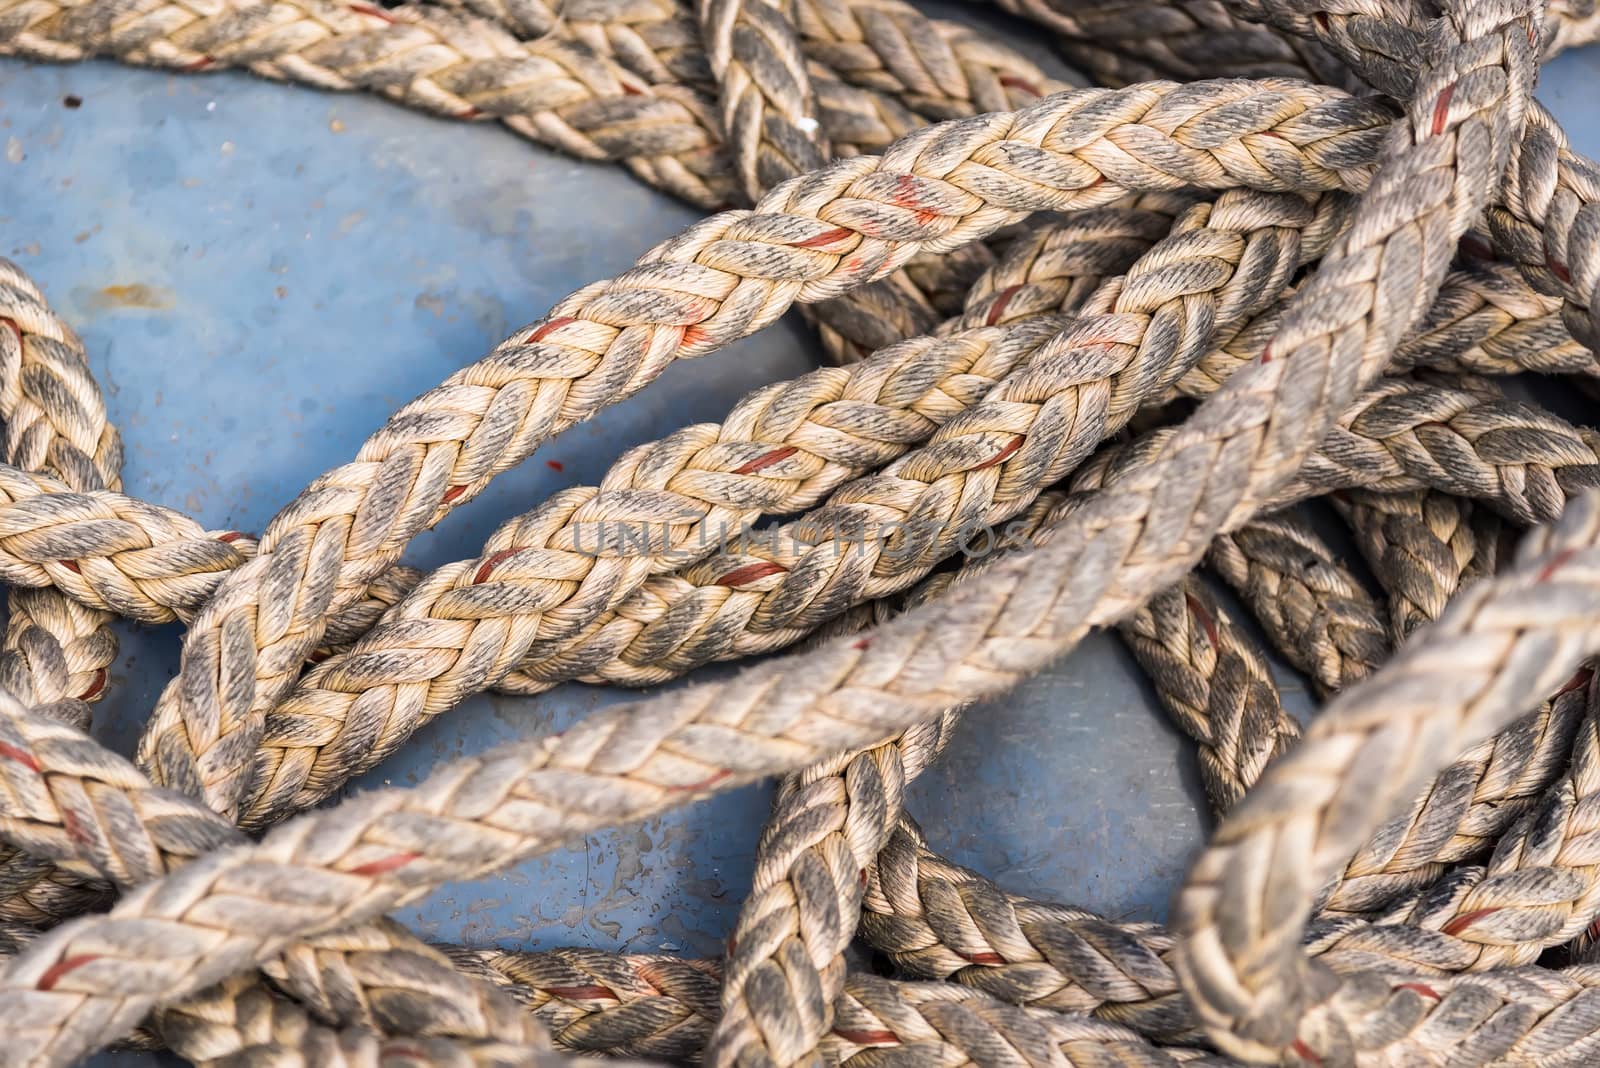 Background texture of coiled marine or nautical rope